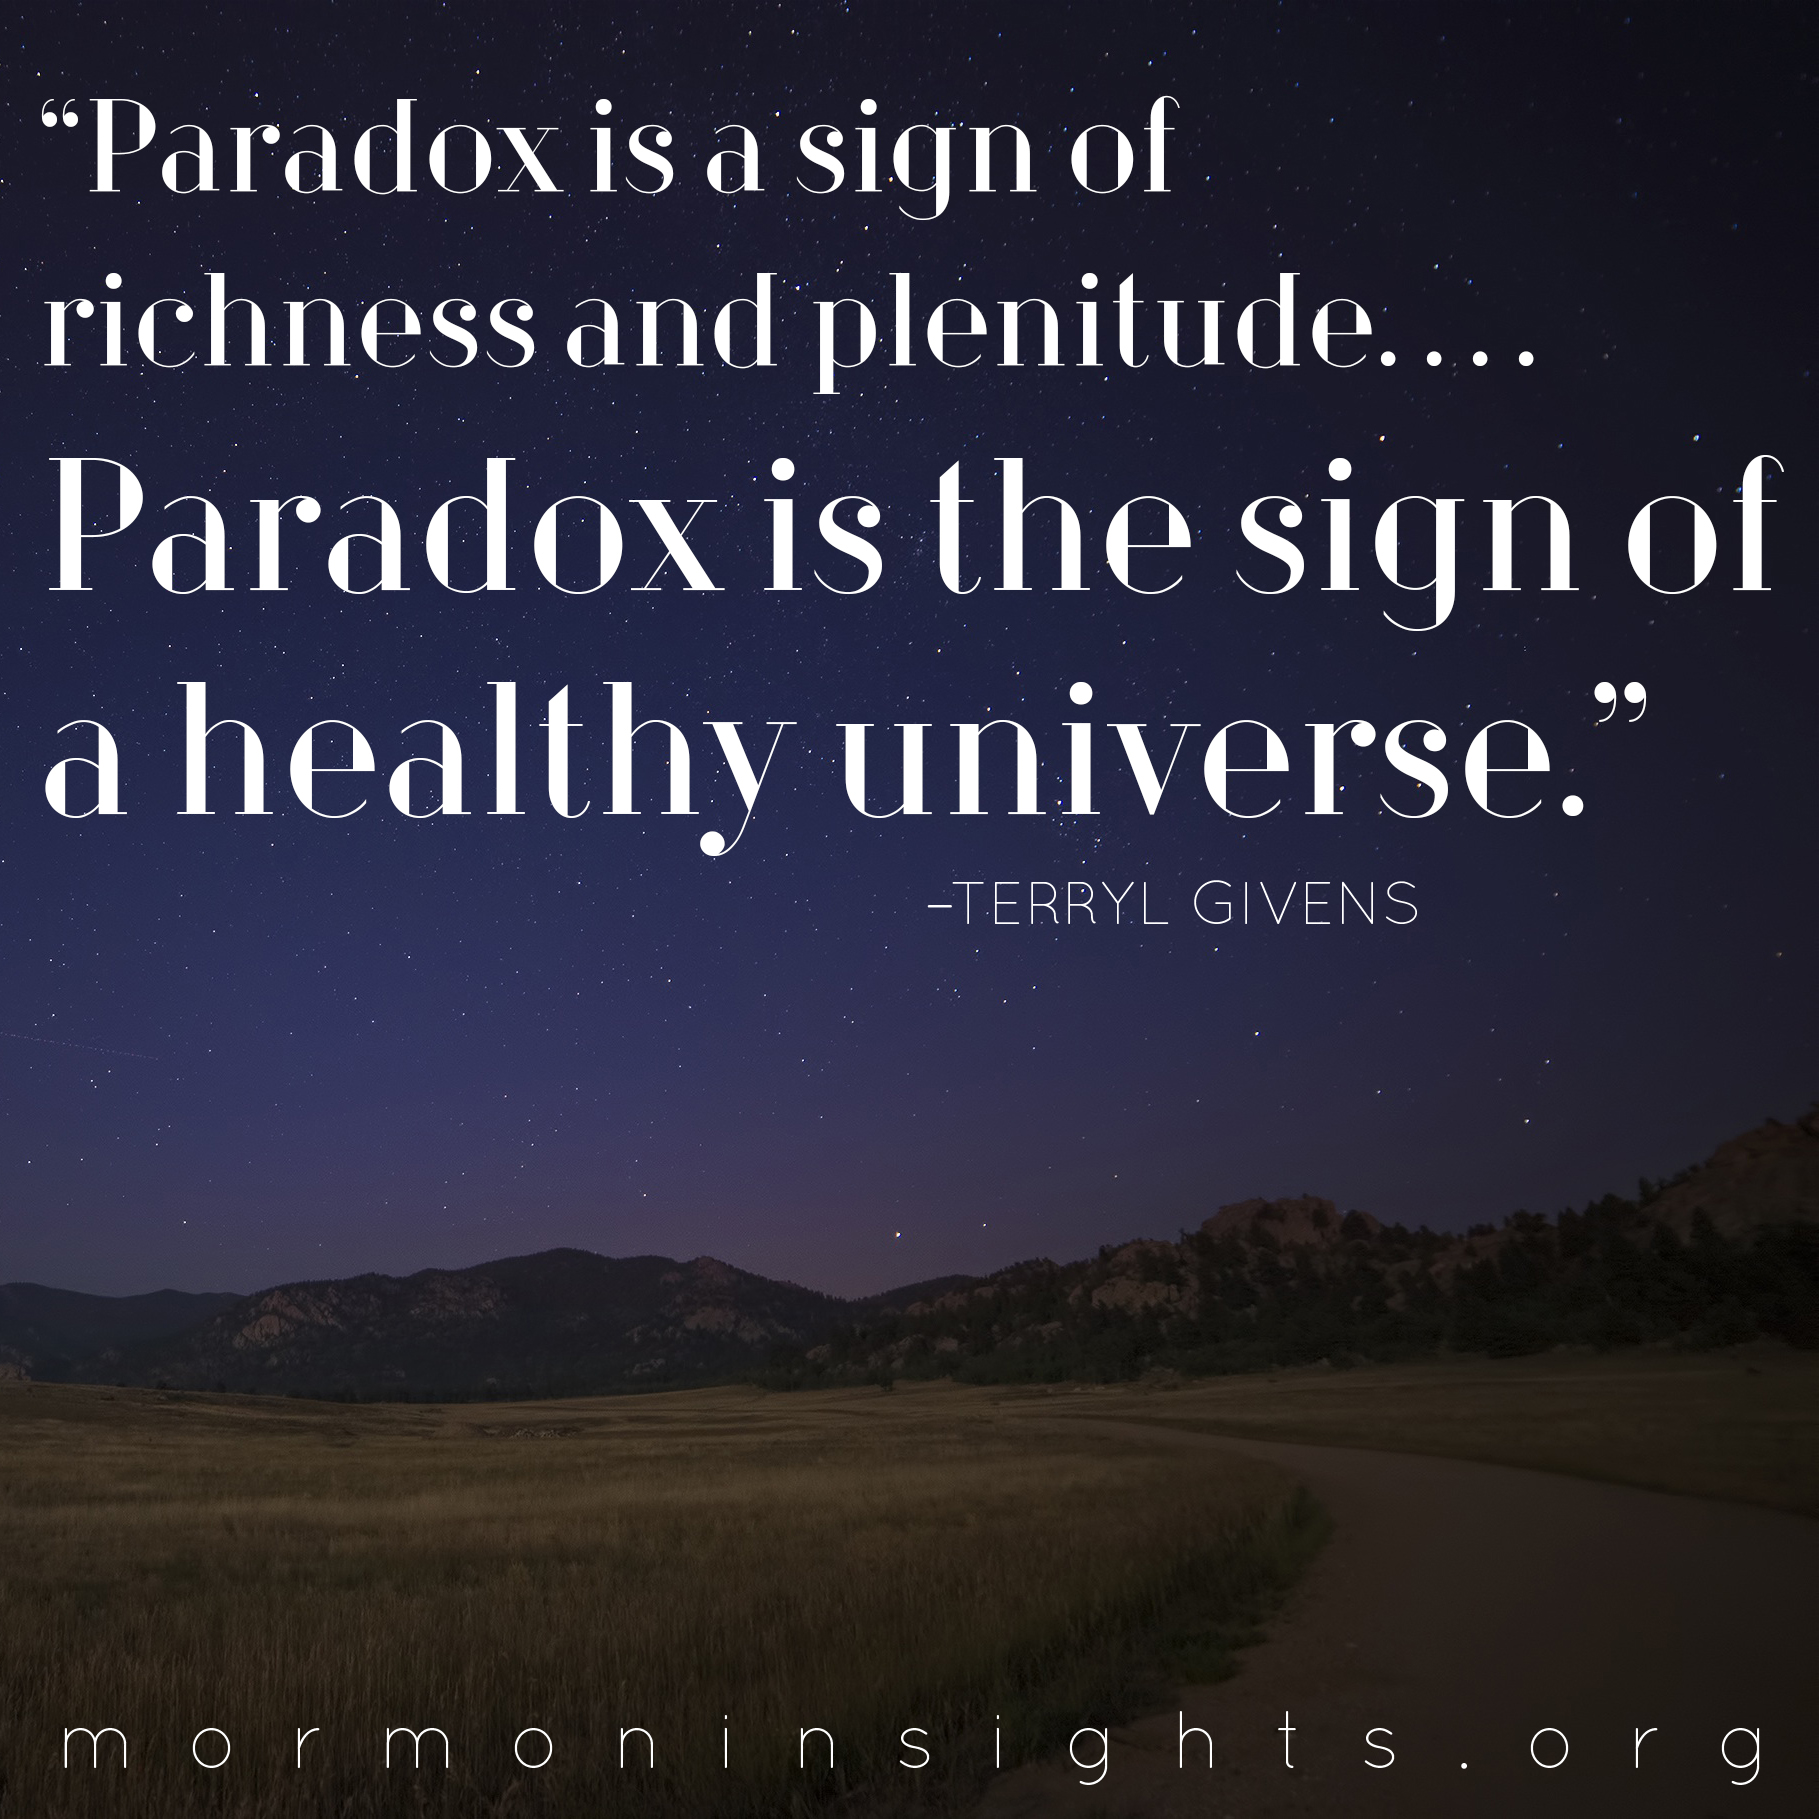 "Paradox is a sign of richness and plenitude. . . . Paradox is the sign of a healthy universe." - Terryl Givens